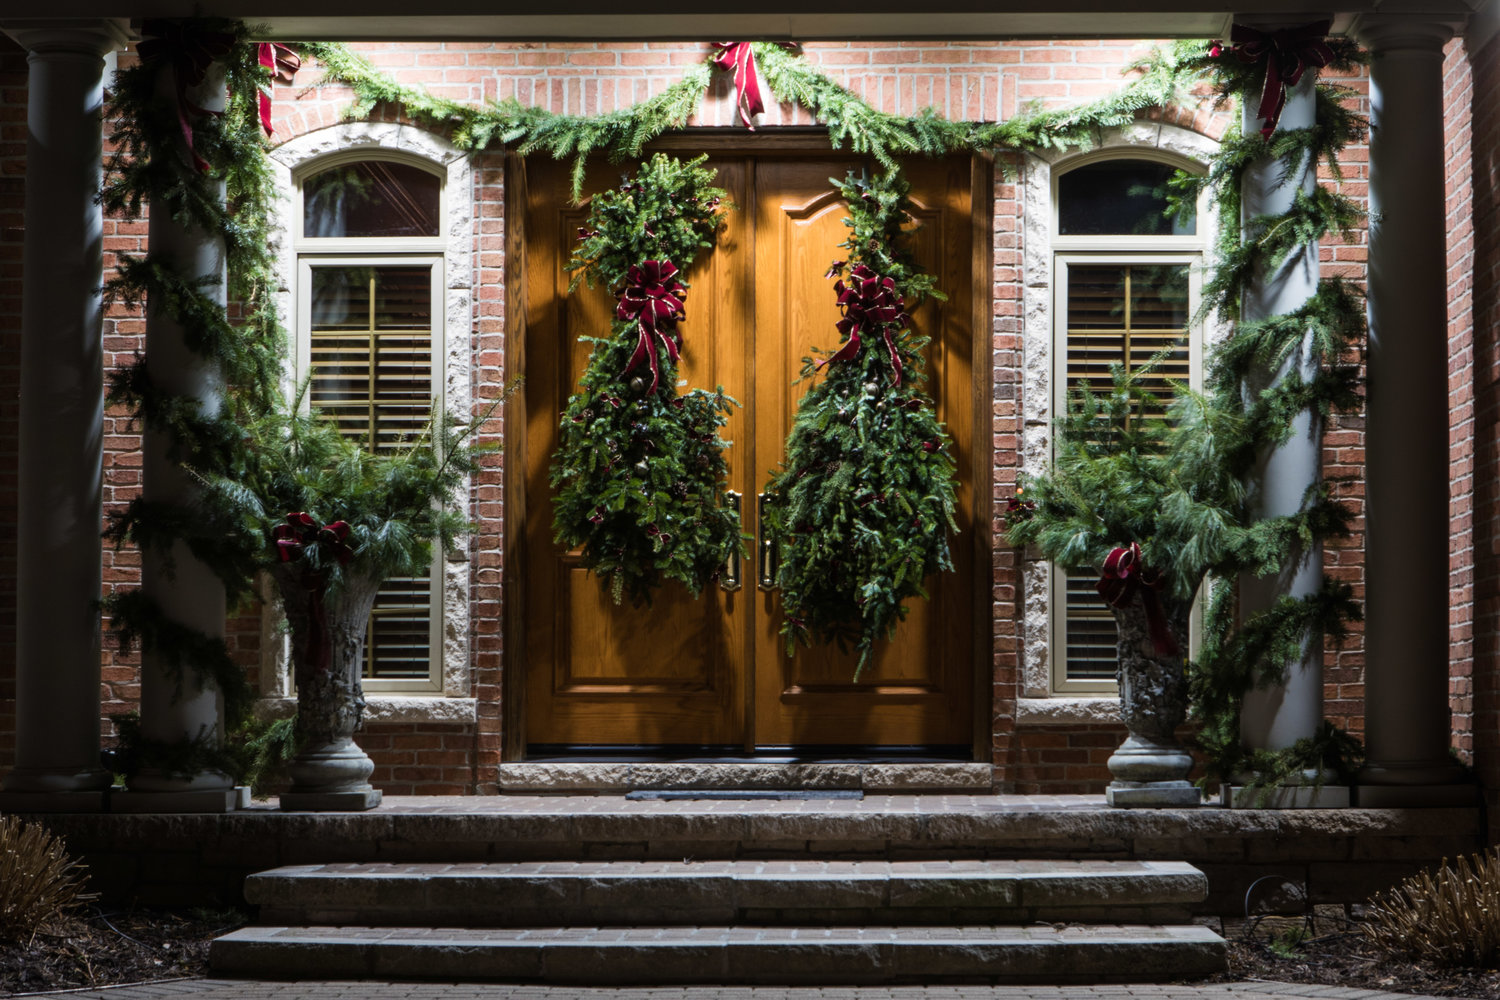 The entrance to this East Lansing home presents an elegant emphasis on garlands, ribbon, and ornaments.